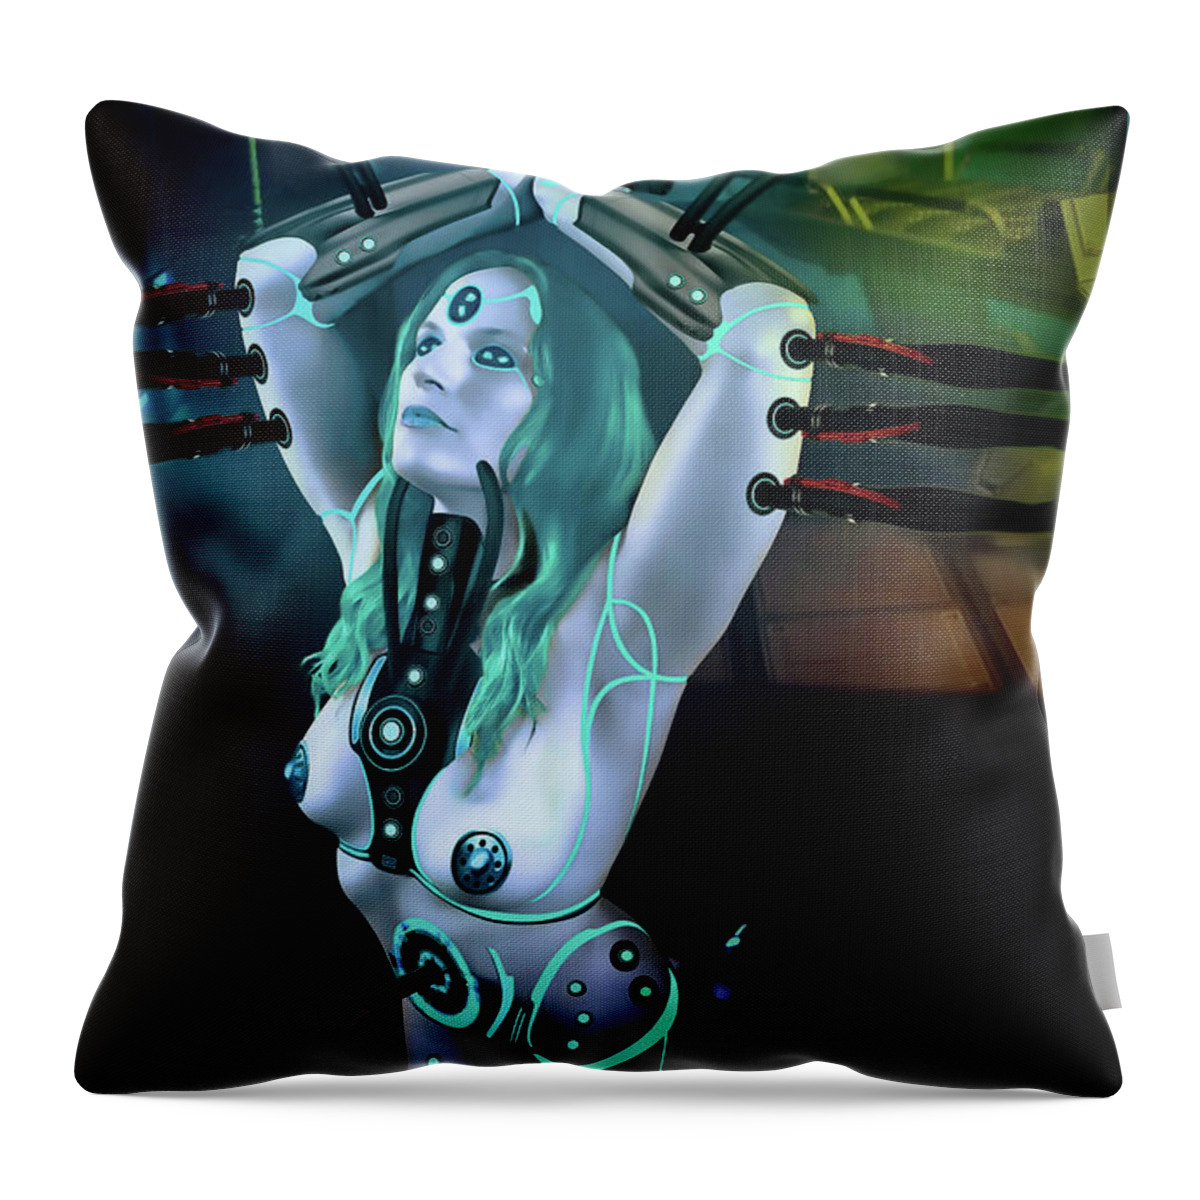 Dark Throw Pillow featuring the digital art A Synthetic Dream by Recreating Creation